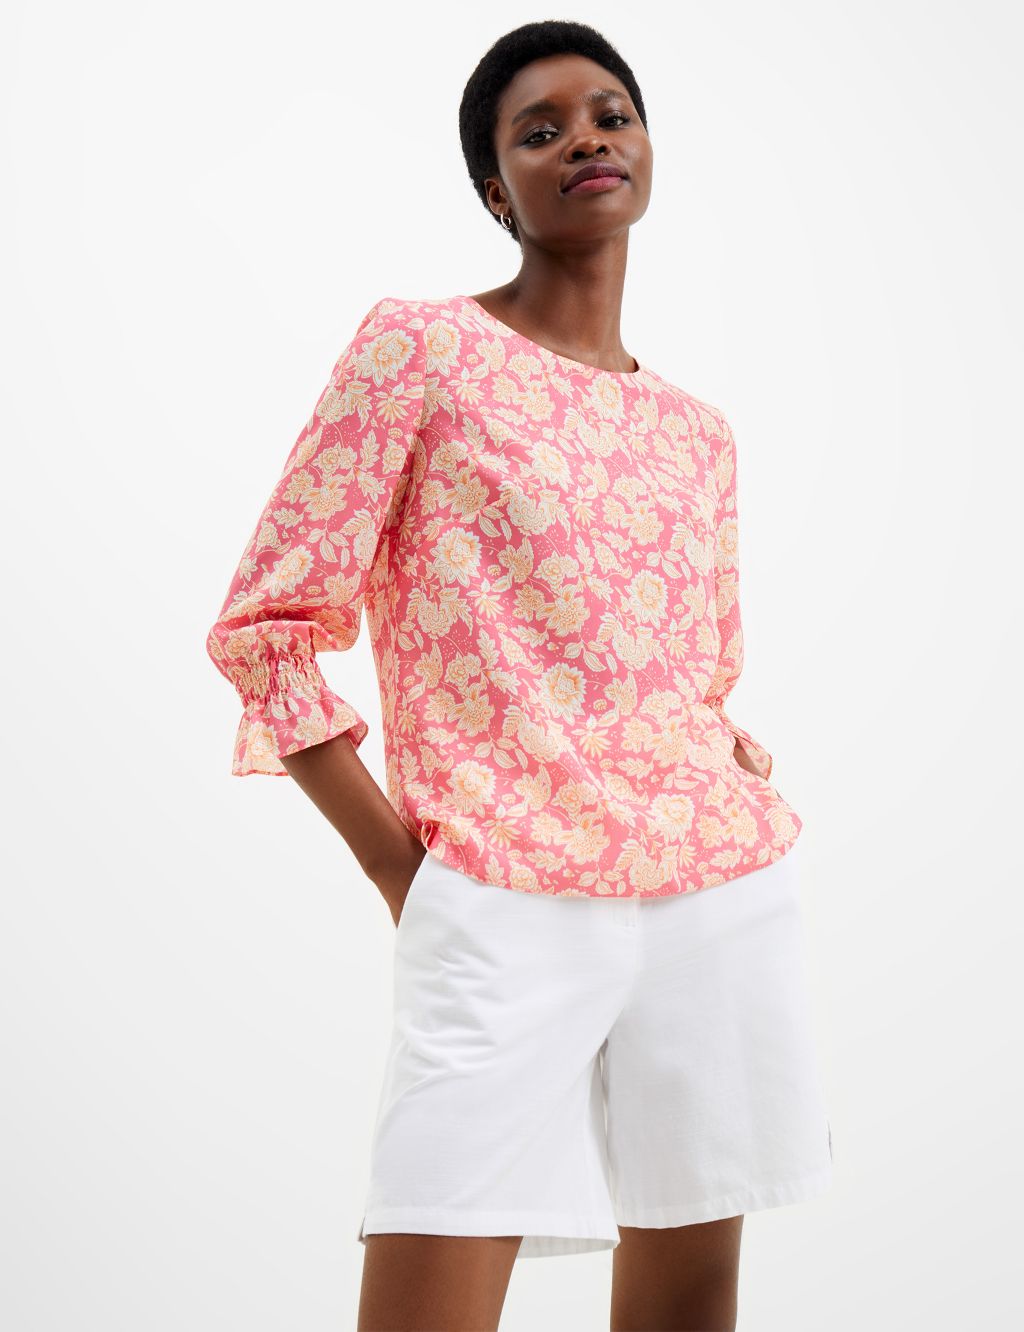 Crepe Floral Shell Top image 1